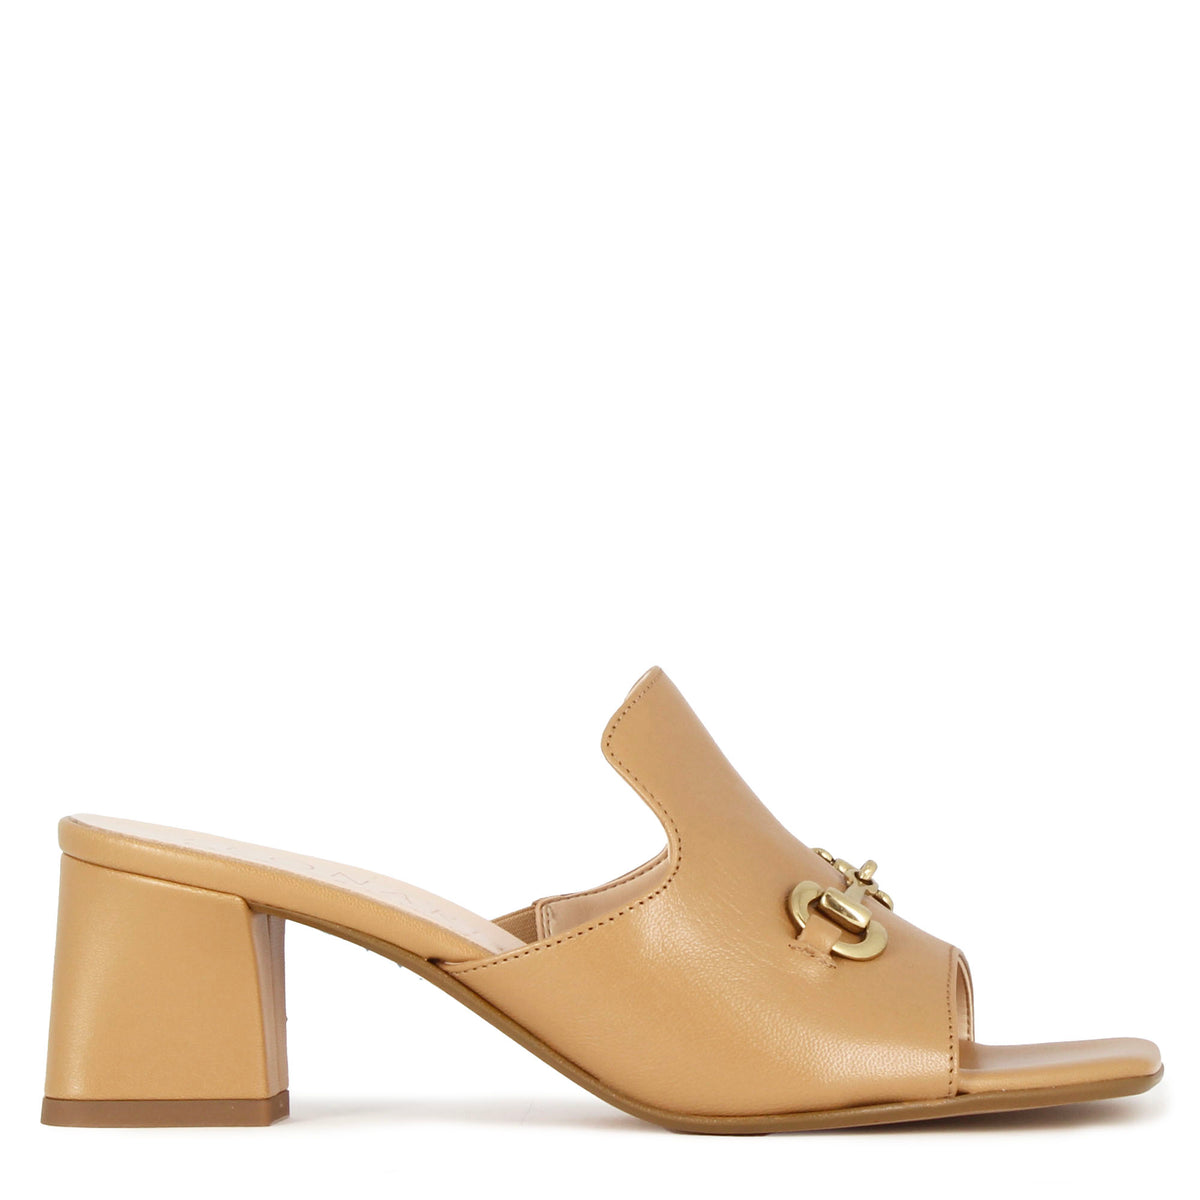 Women's slider sandal in brown leather with clamp